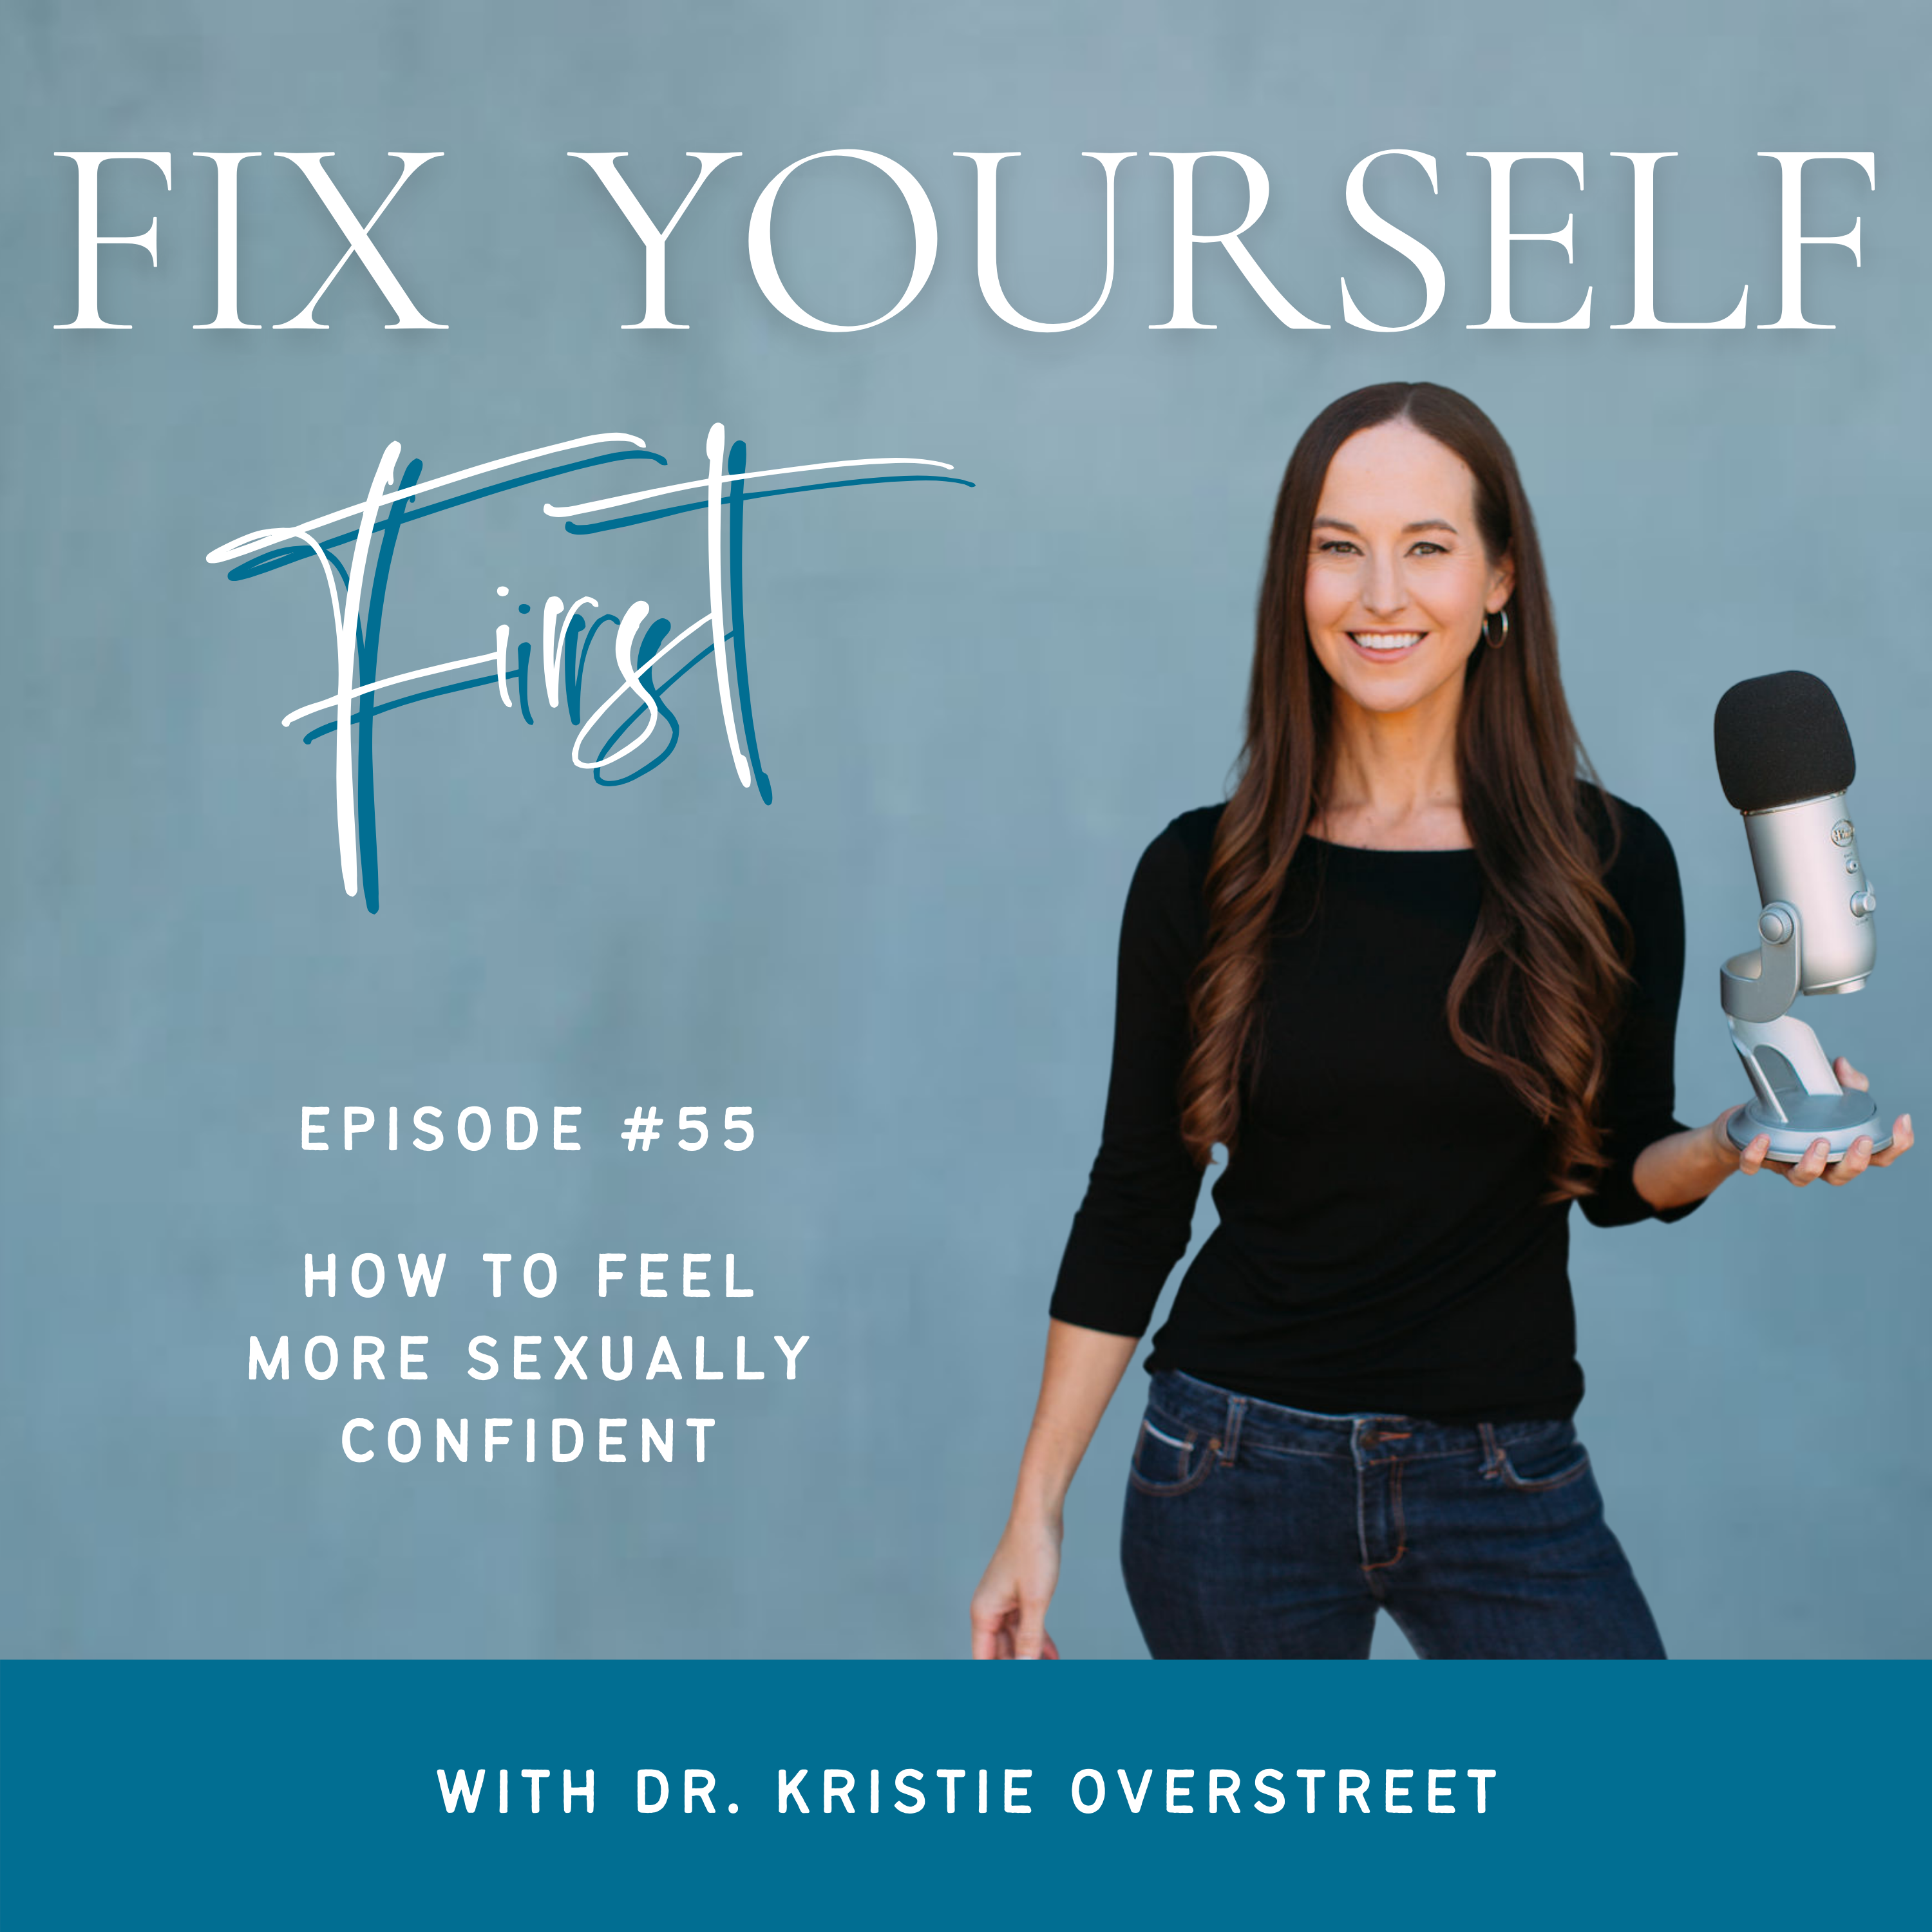 Fix Yourself First - Episode 55